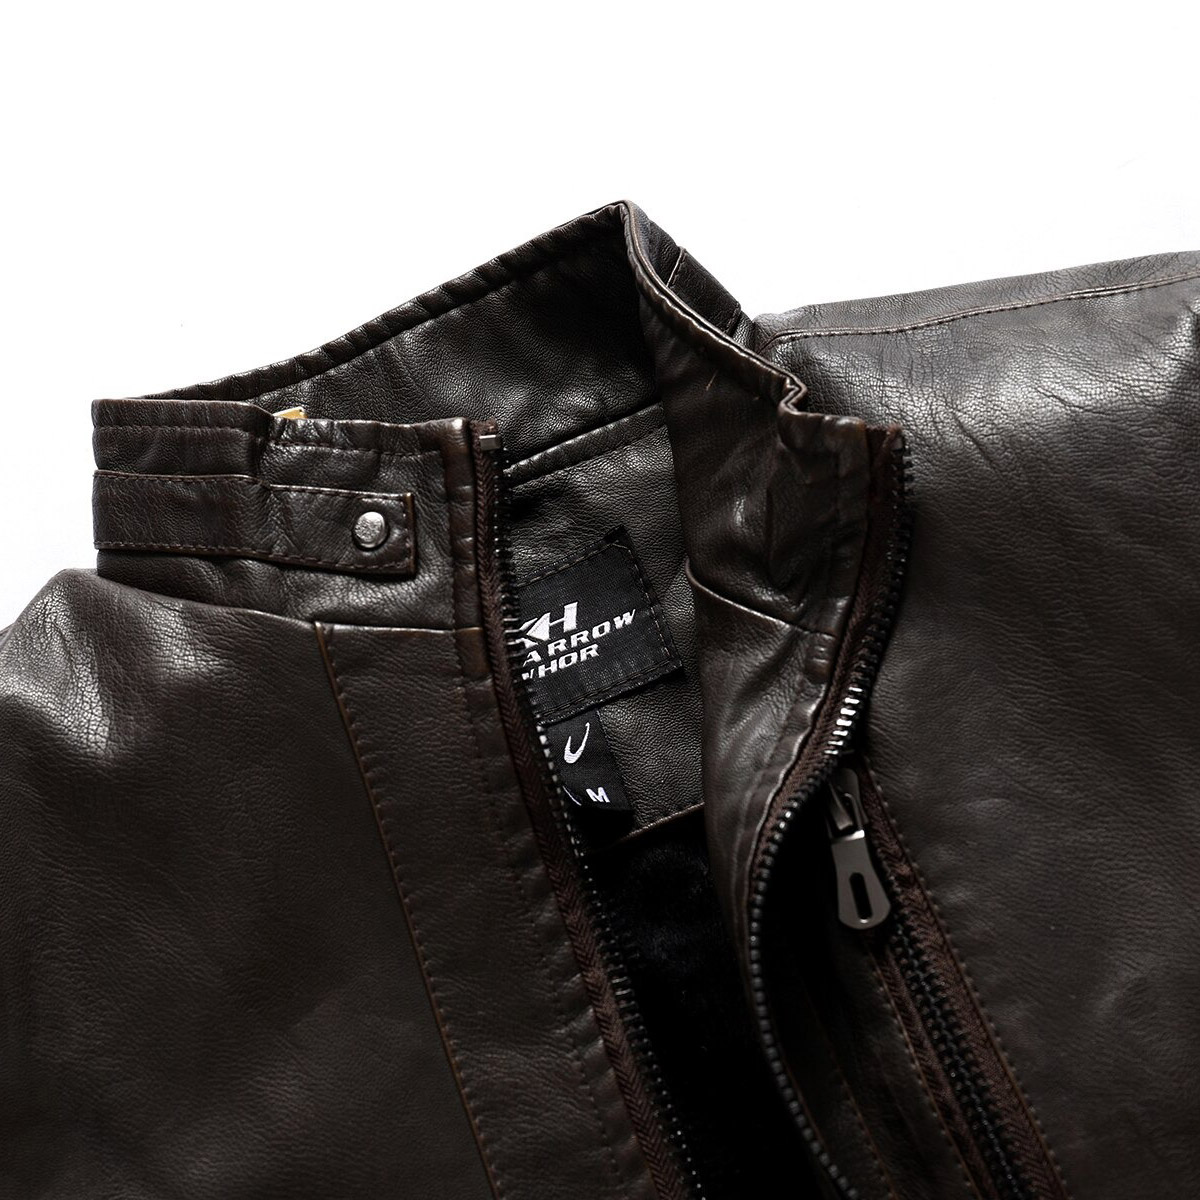 Vintage Male Faux Leather Jacket / Motorcycle Comfortable Thick Jakets for Men - HARD'N'HEAVY